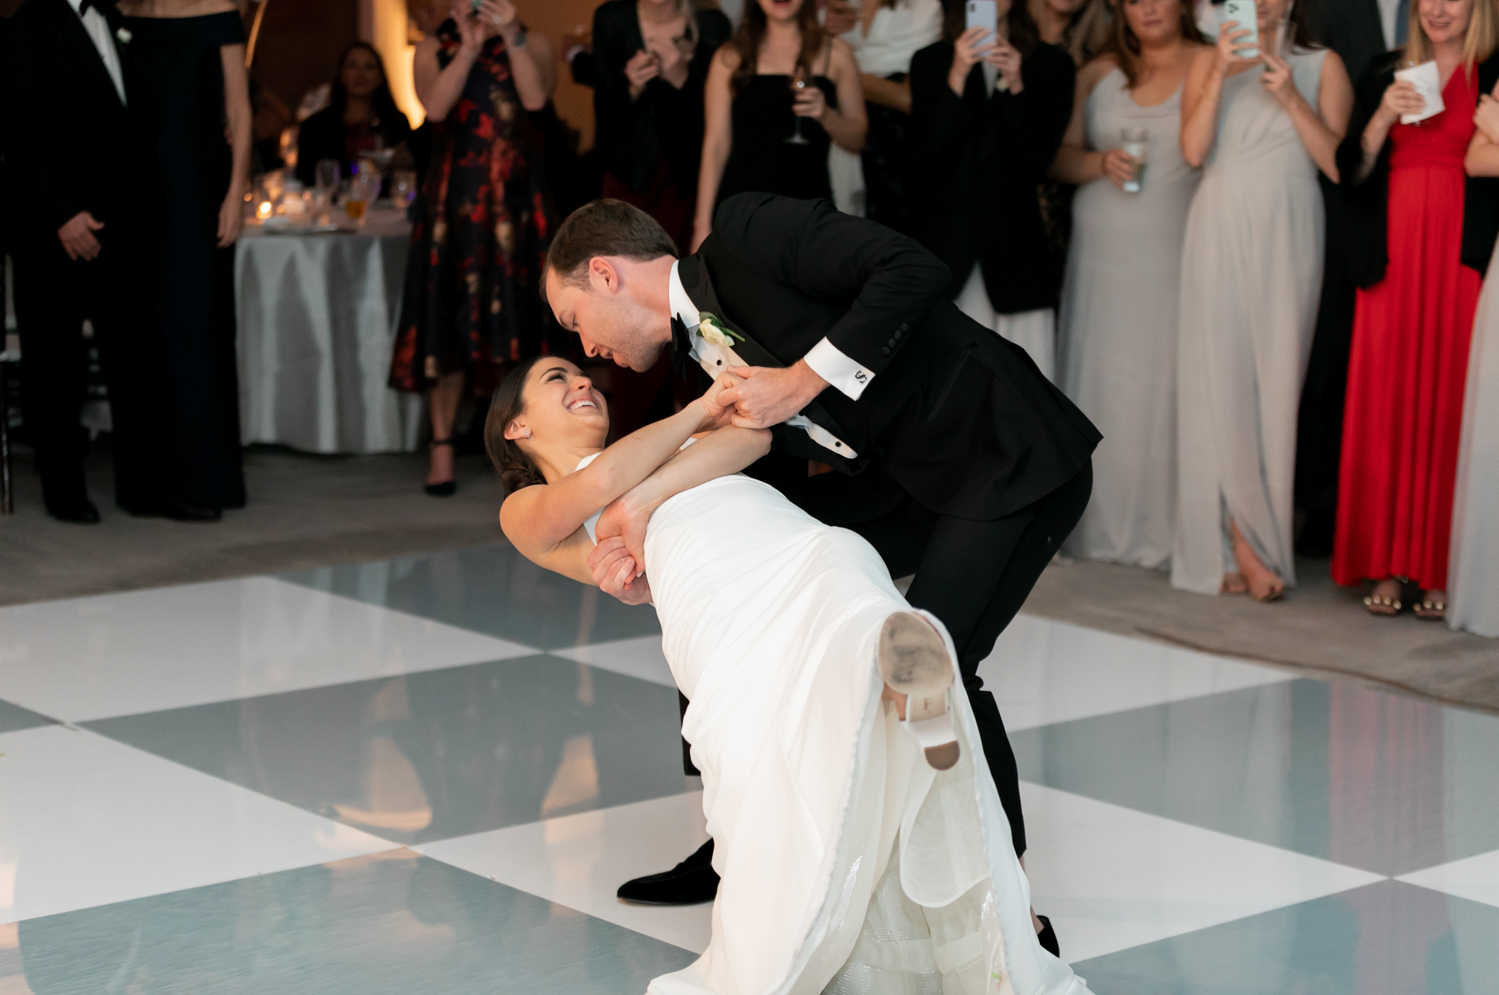 The groom dips the bride during their first dance and they smile at each other.